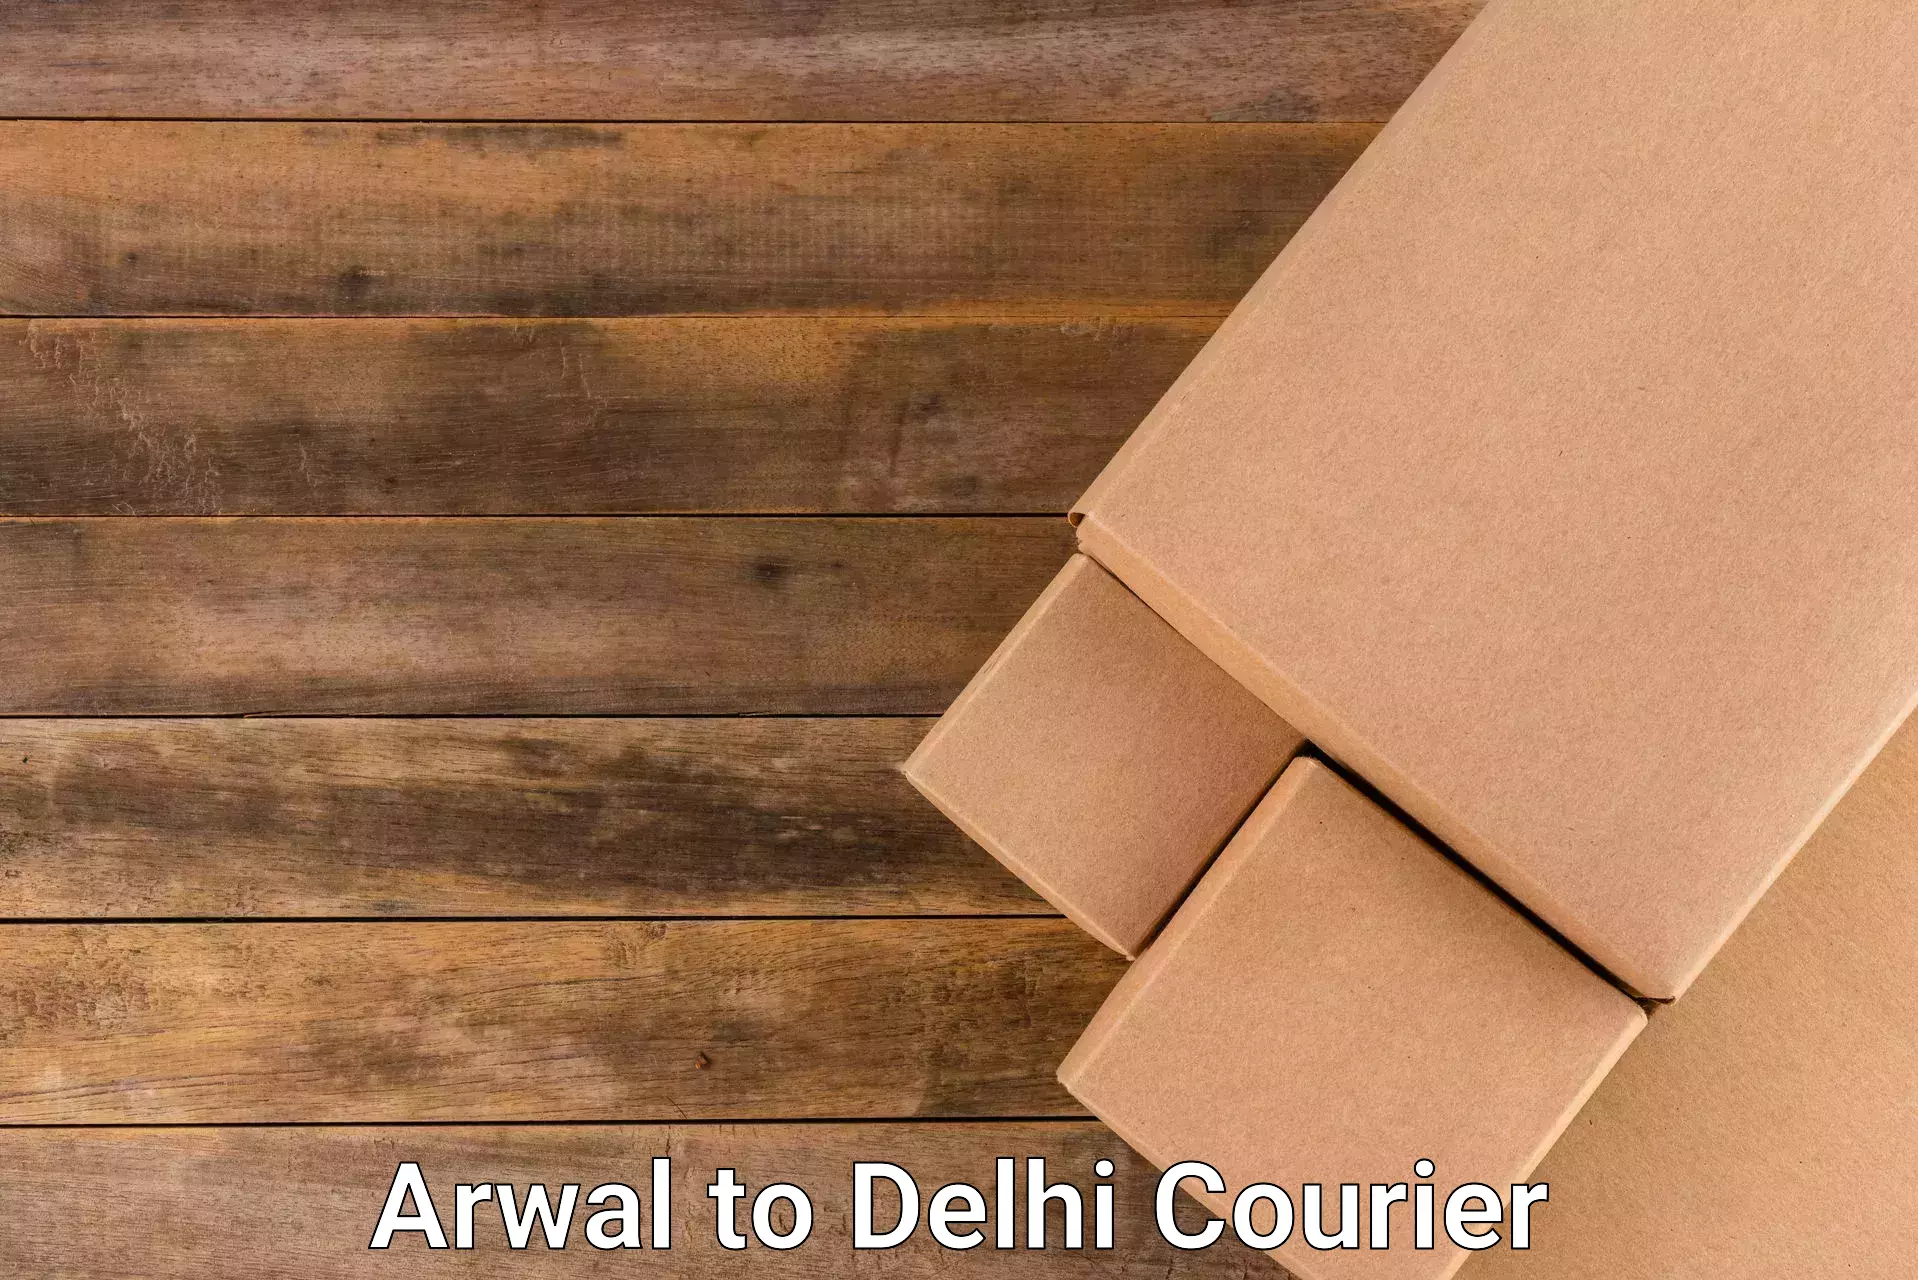 Efficient order fulfillment Arwal to NCR